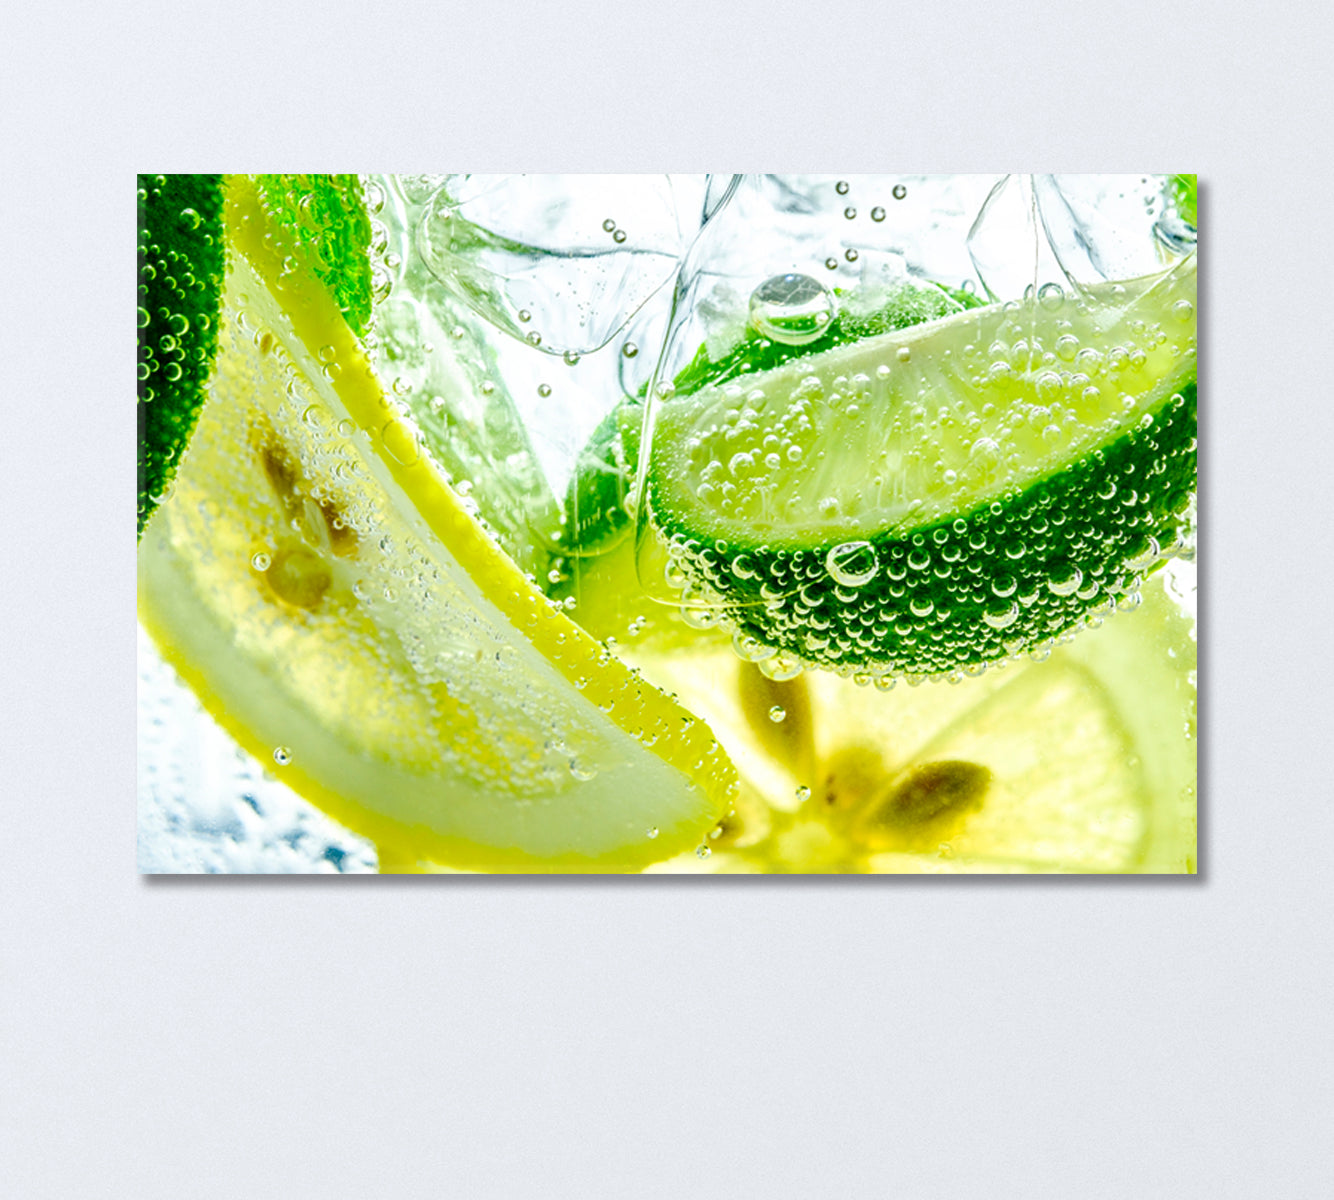 Refreshing Drink with Lemon and Lime Canvas Print-Canvas Print-CetArt-1 Panel-24x16 inches-CetArt